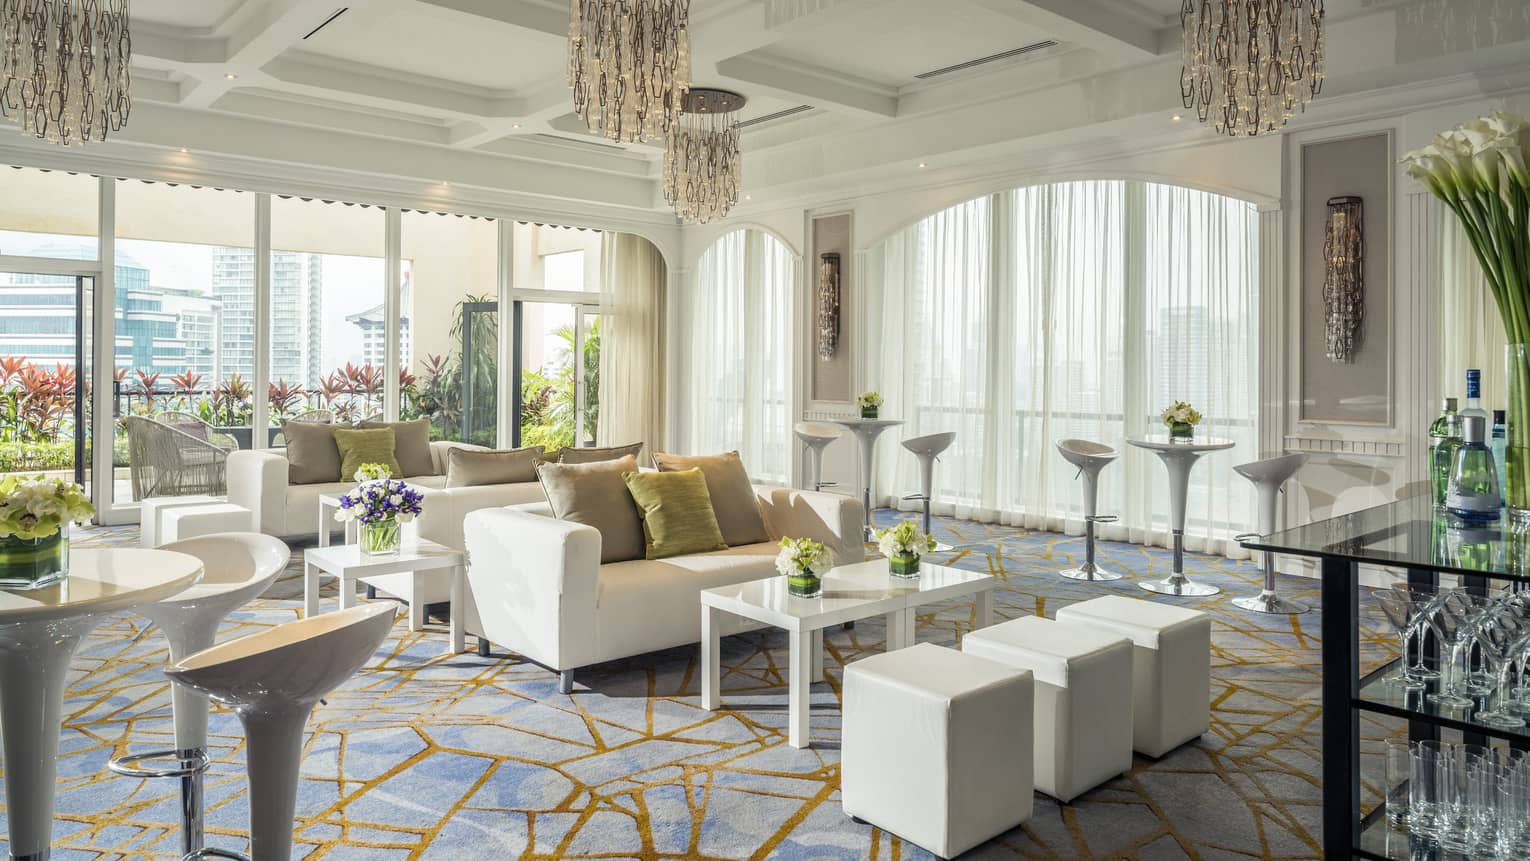 Penthouse room with floor to ceiling windows, contemporary white furniture, chandeliers, flowers